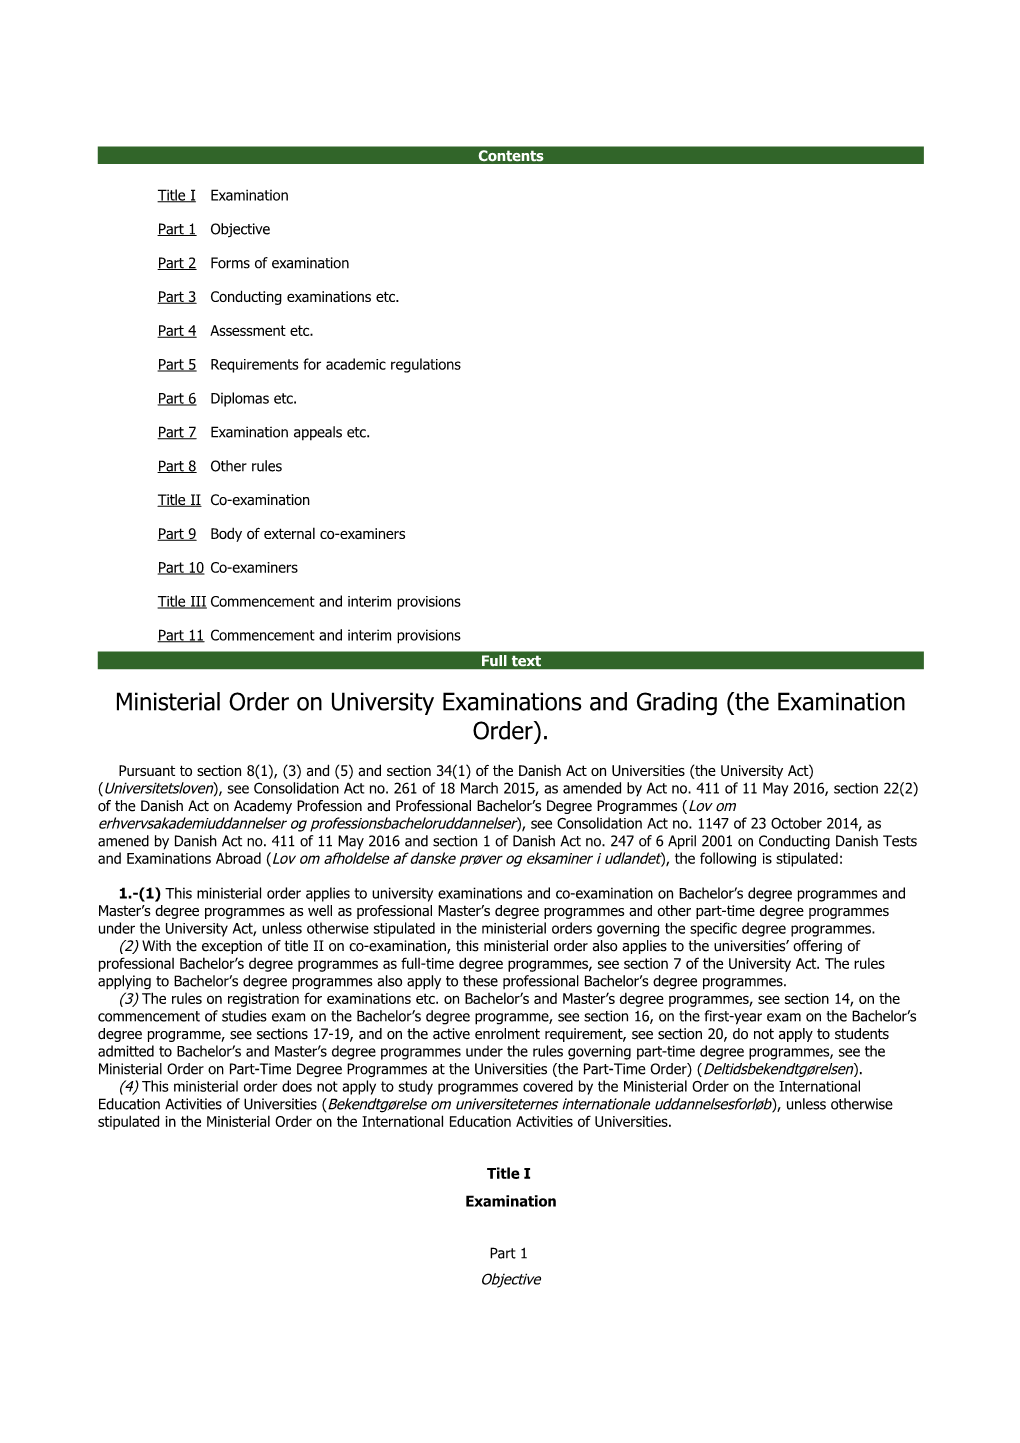 Ministerial Order on University Examinations and Grading (The Examination Order)